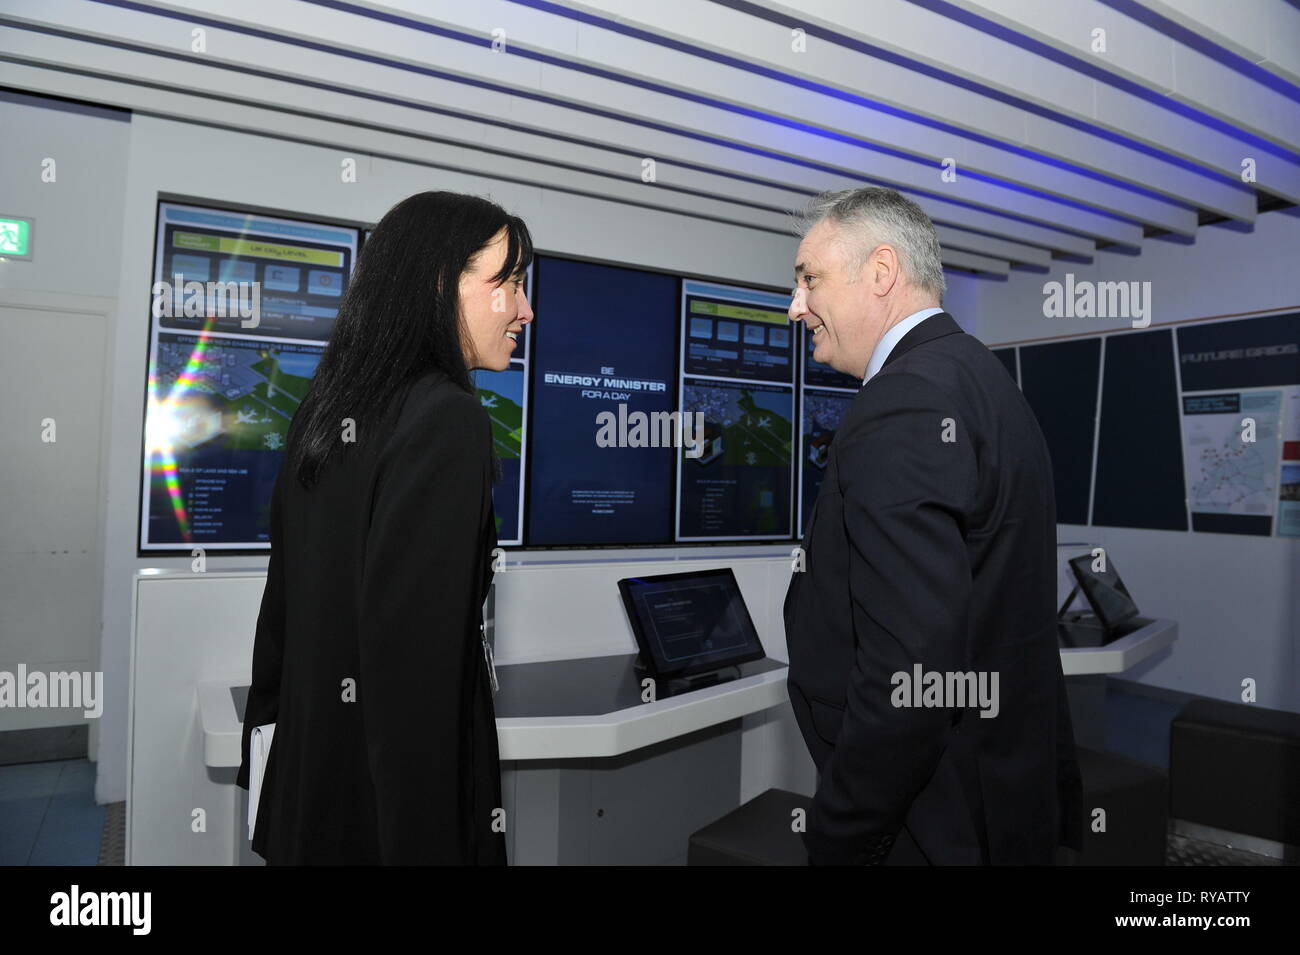 Glasgow, UK. 13 March 2019.  Mr Lochhead tries out an exhibit 'Be Energy Minister For The Day' is seen sitting at an interactive computer console which educates visitors all about energy usage and consumption.  Funding for Scotland’s four science centres will be announced during British Science Week.  Scotland is the only part of the UK where science centres are supported through annual funding. Credit: Colin Fisher/Alamy Live News Stock Photo